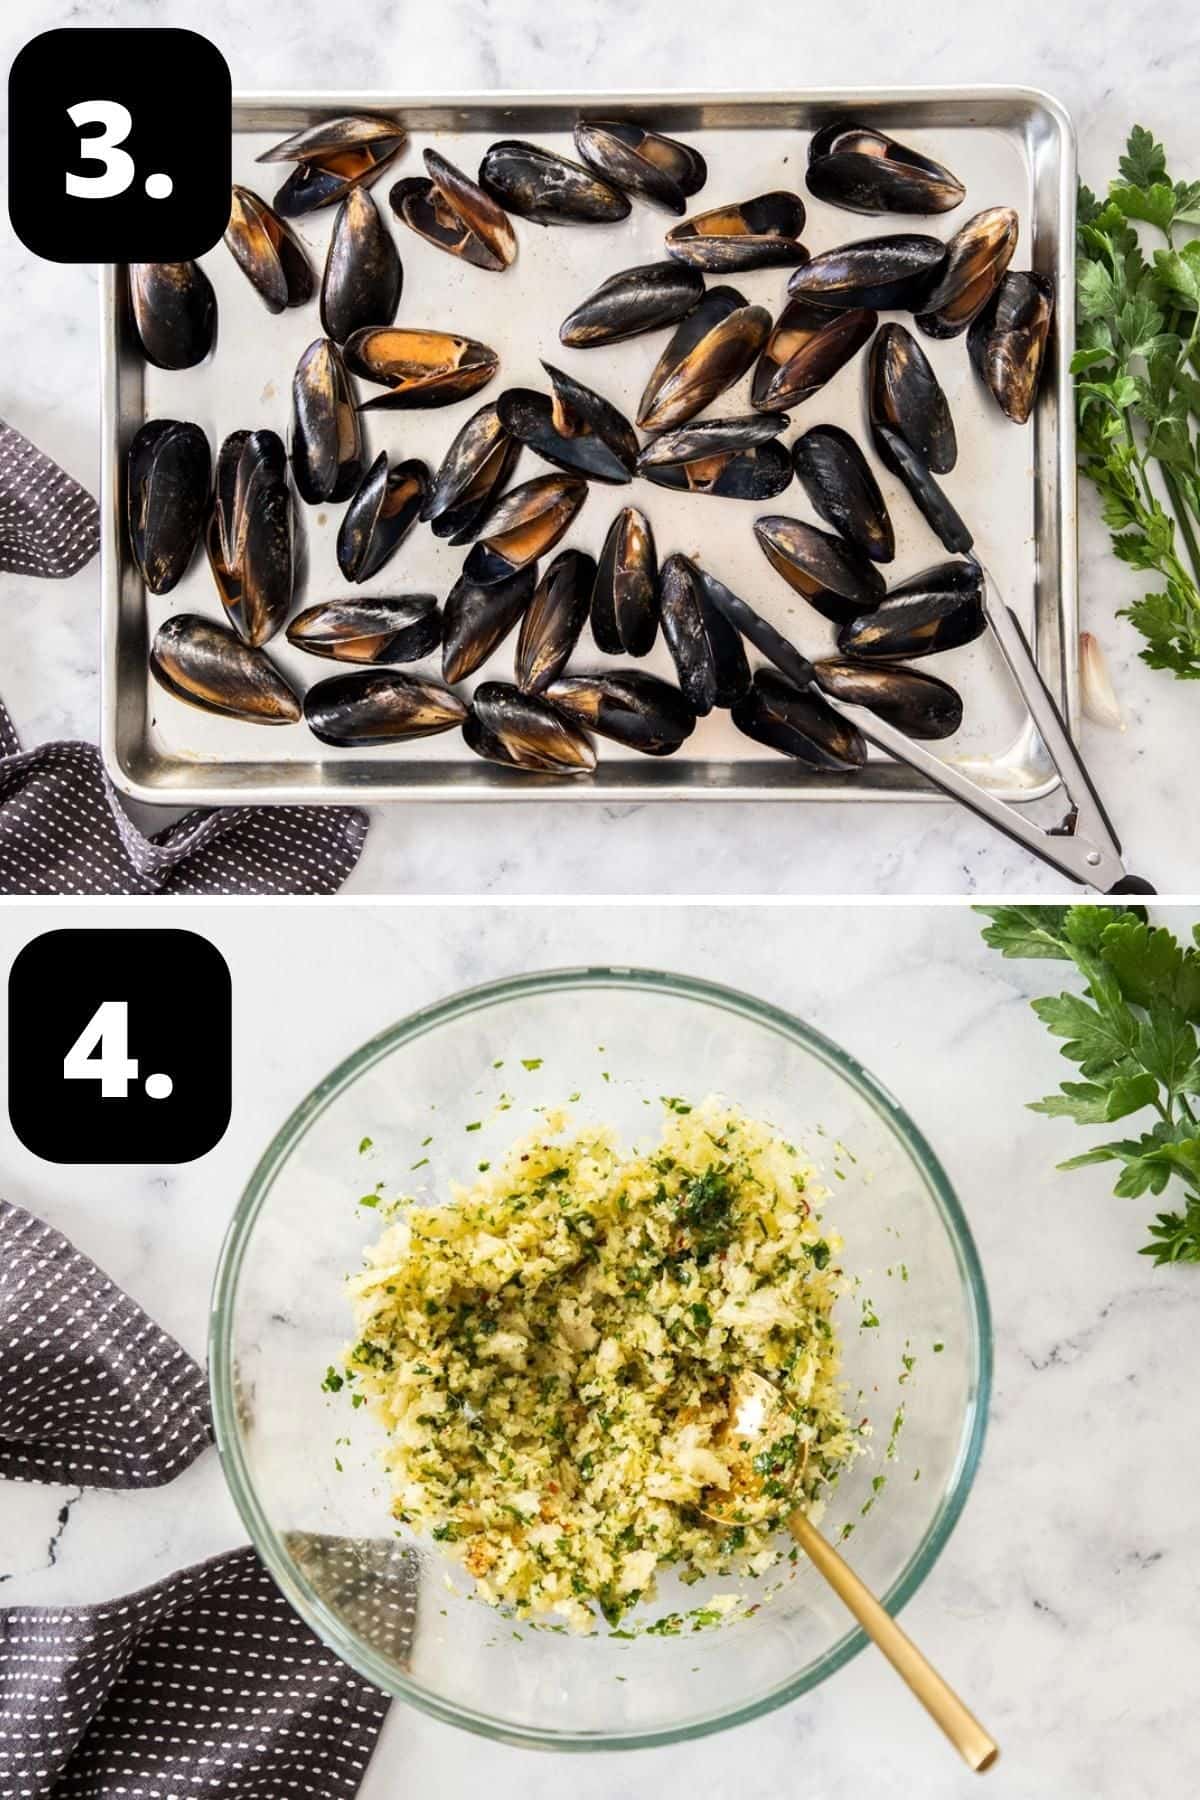 Steps 3-4 of preparing this recipe: the cooked mussels on a baking tray and preparing the bread crumb topping in a glass bowl.